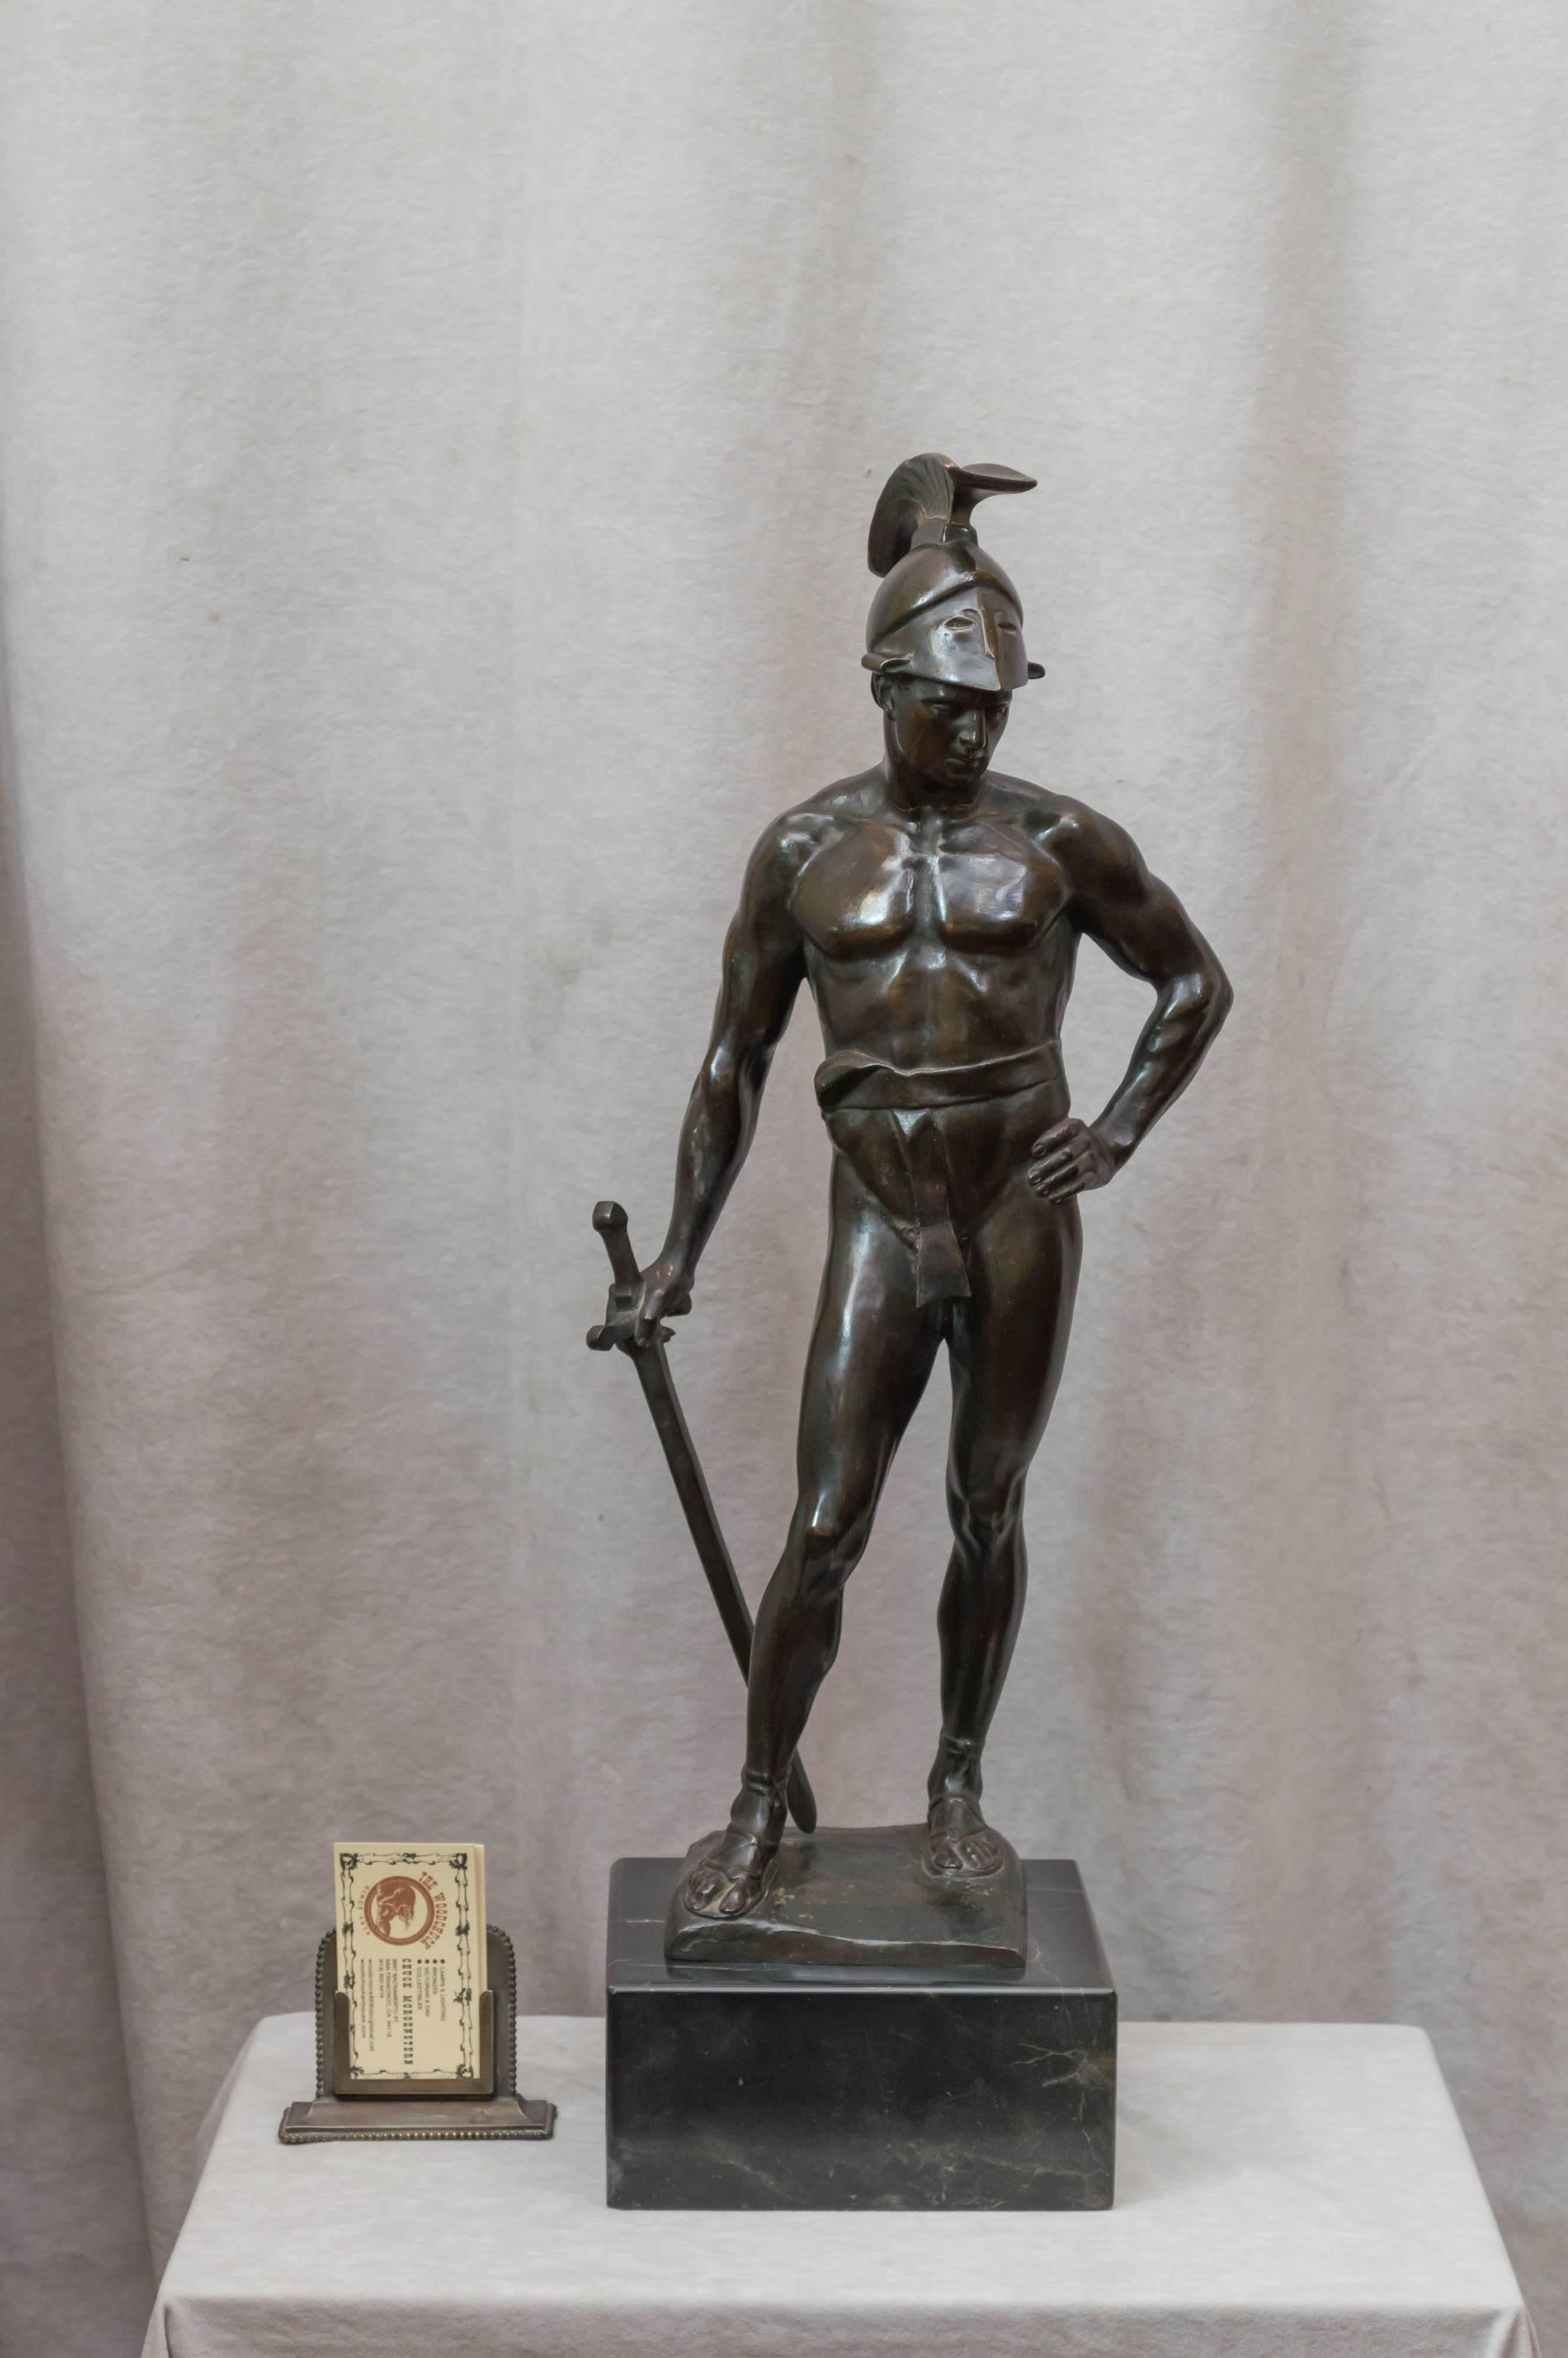 Austrian male bronze of a warrior artist signed "Seifert" a very handsome masculine bronze figure of a scantily clad warrior. Rich dark patina, and mounted on the original marble base.
Victor Seifert 1870-1953 produced many fine bronzes